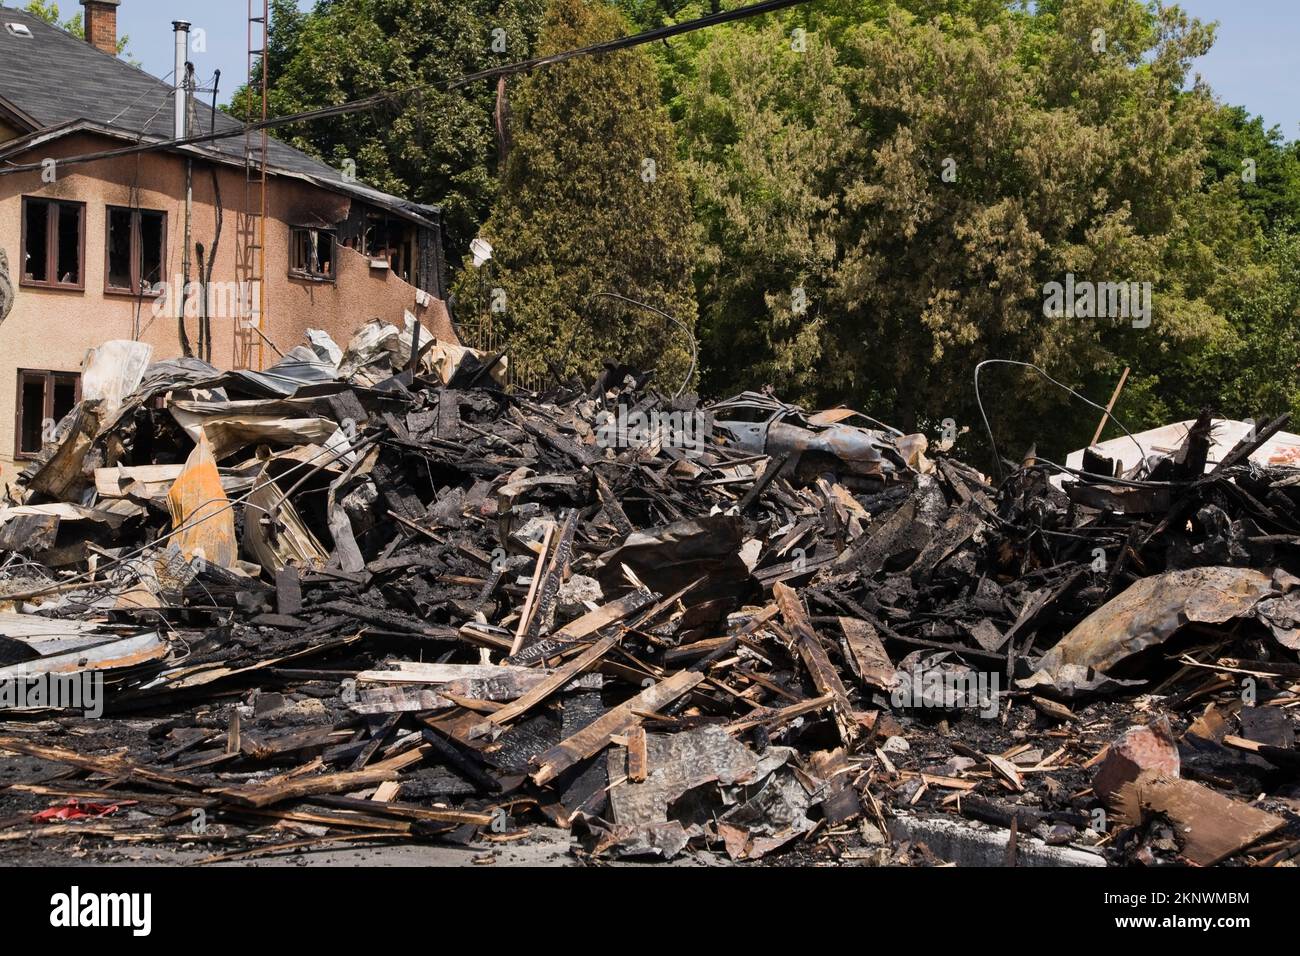 Fire damaged cottage style home next to remnants of burnt down commercial building. Stock Photo